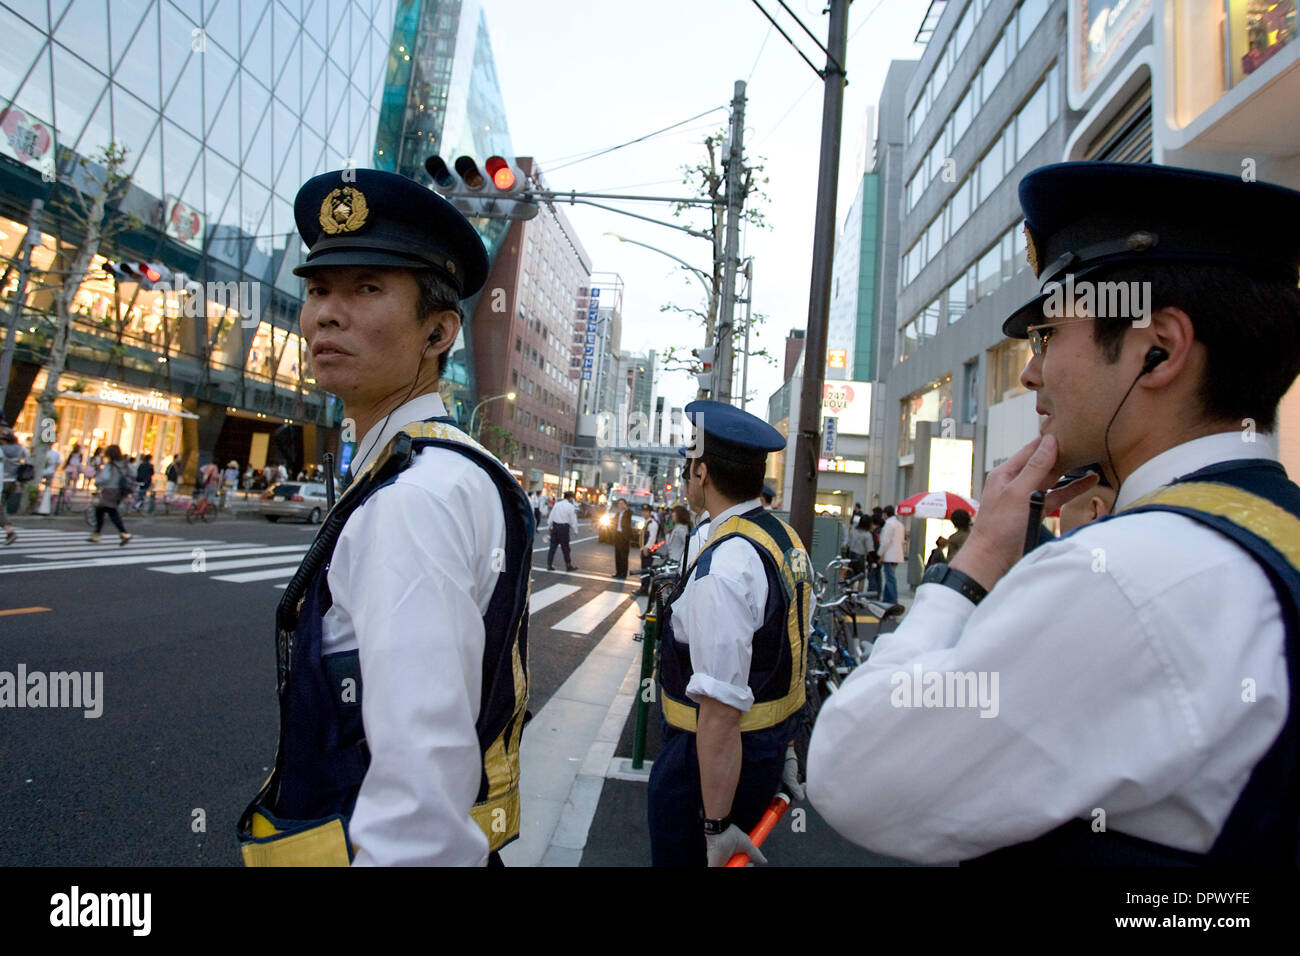 May 03, 2009 - Tokyo, Japan - Police officers direct traffic during a demonstration on the streets of Tokyo involving Japanese activists protesting about Japan's economic issues. (Credit Image: © Christopher Jue/ZUMA Press) Stock Photo